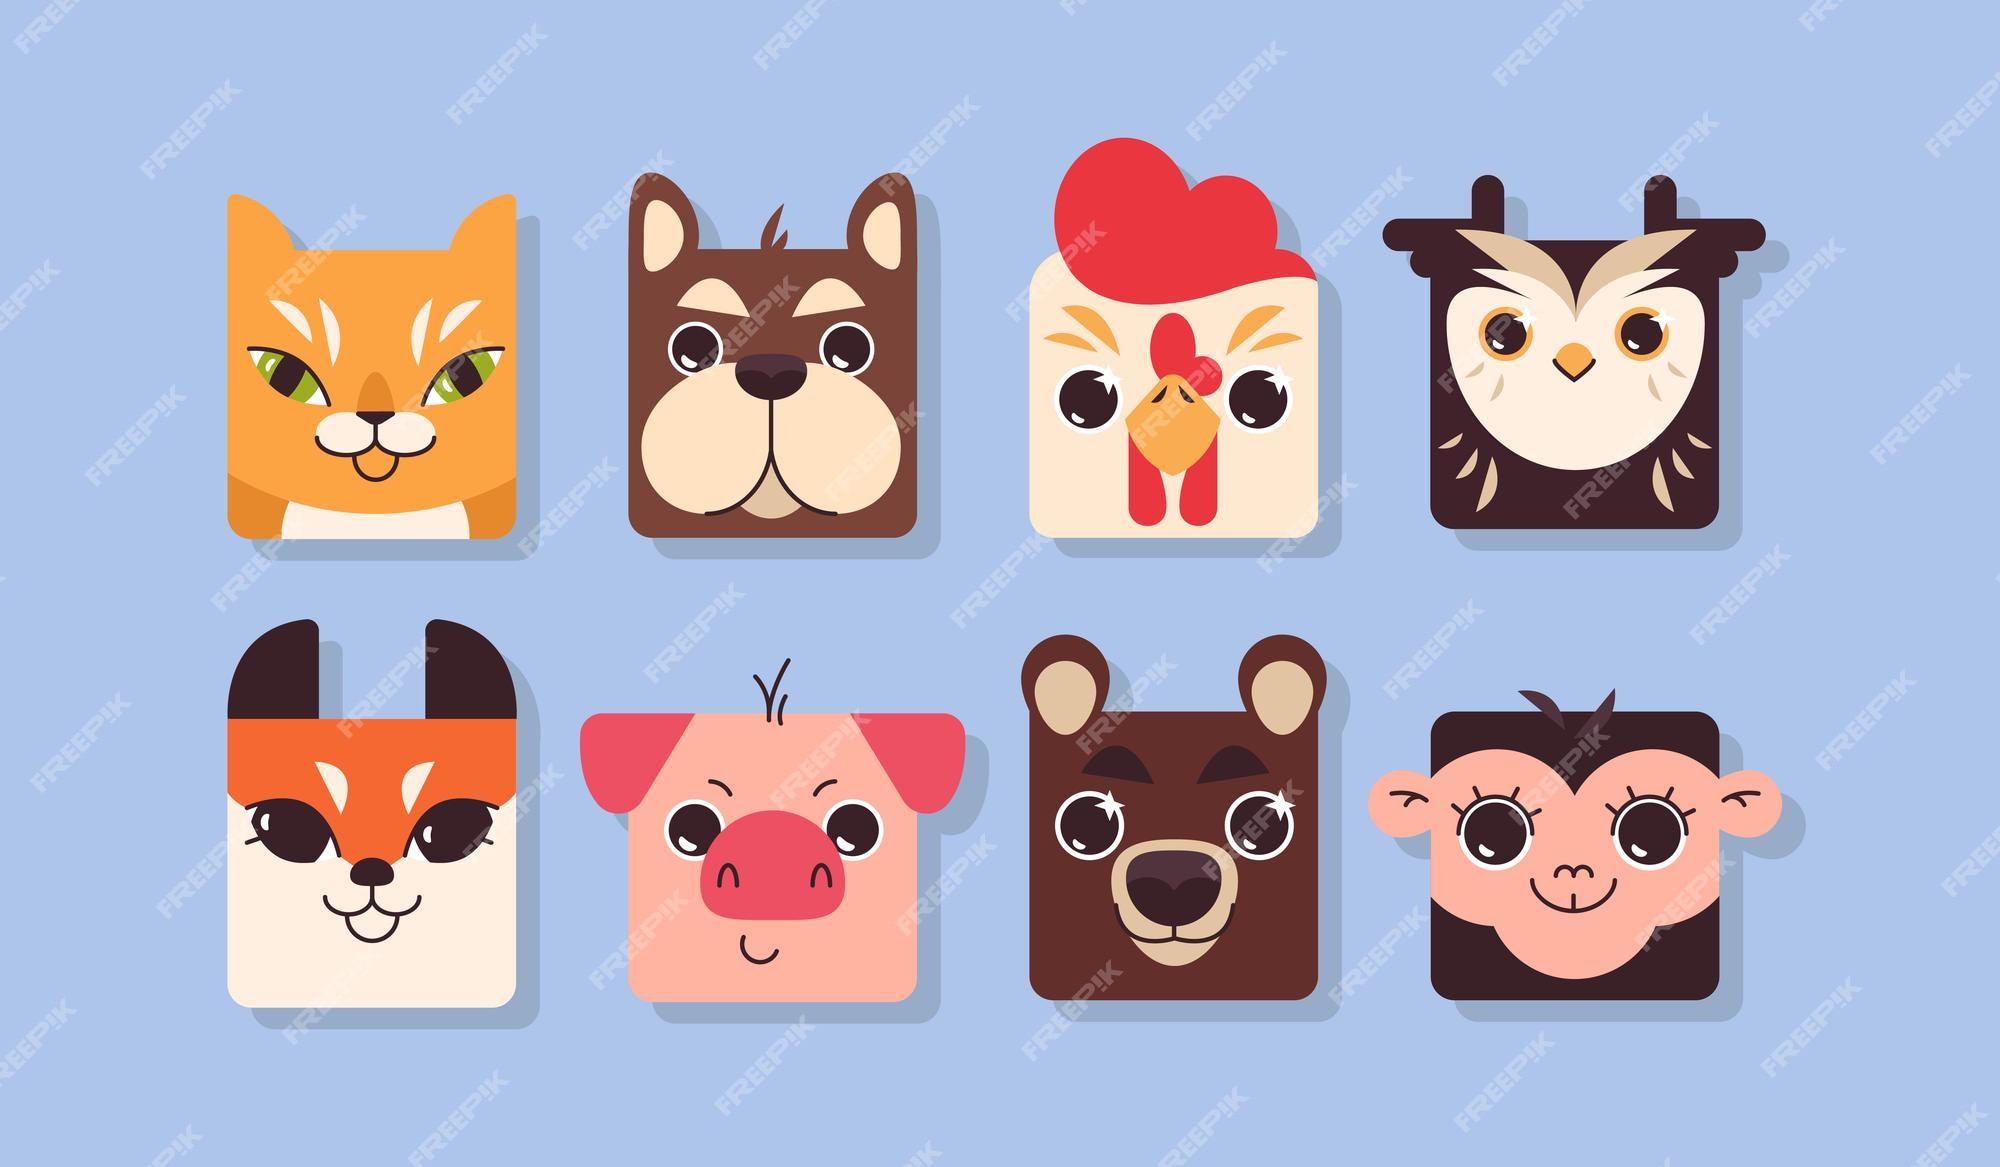 Free Vector | Flat cute colorful square animal faces funny pig cow dog cat  fox monkey bear and chicken zoo game elements for kids app avatar icon set  kid collection head shape